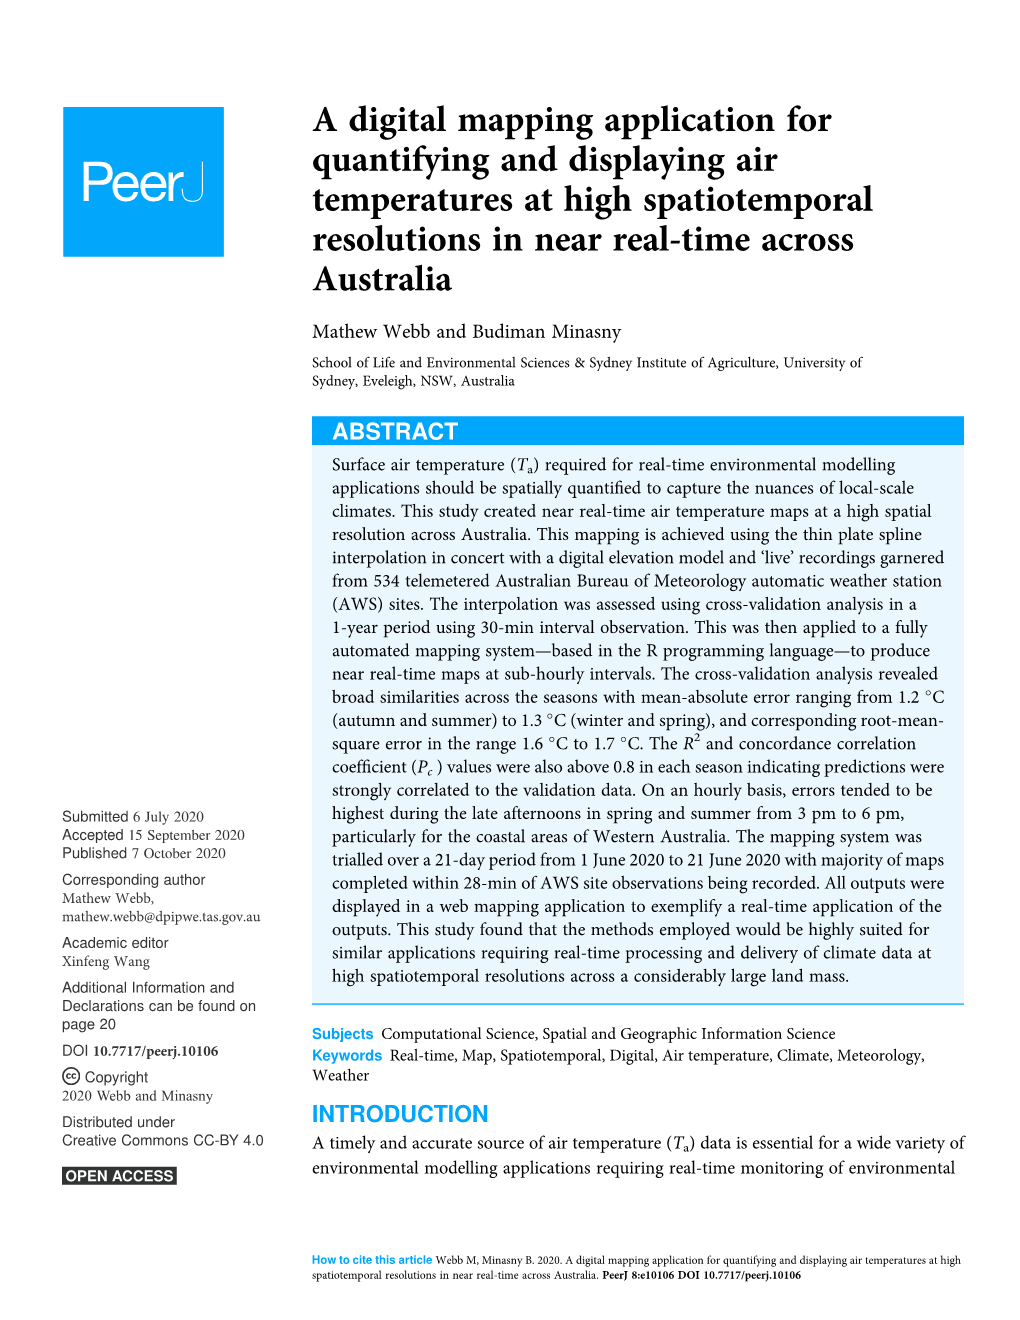 A Digital Mapping Application for Quantifying and Displaying Air Temperatures at High Spatiotemporal Resolutions in Near Real-Time Across Australia